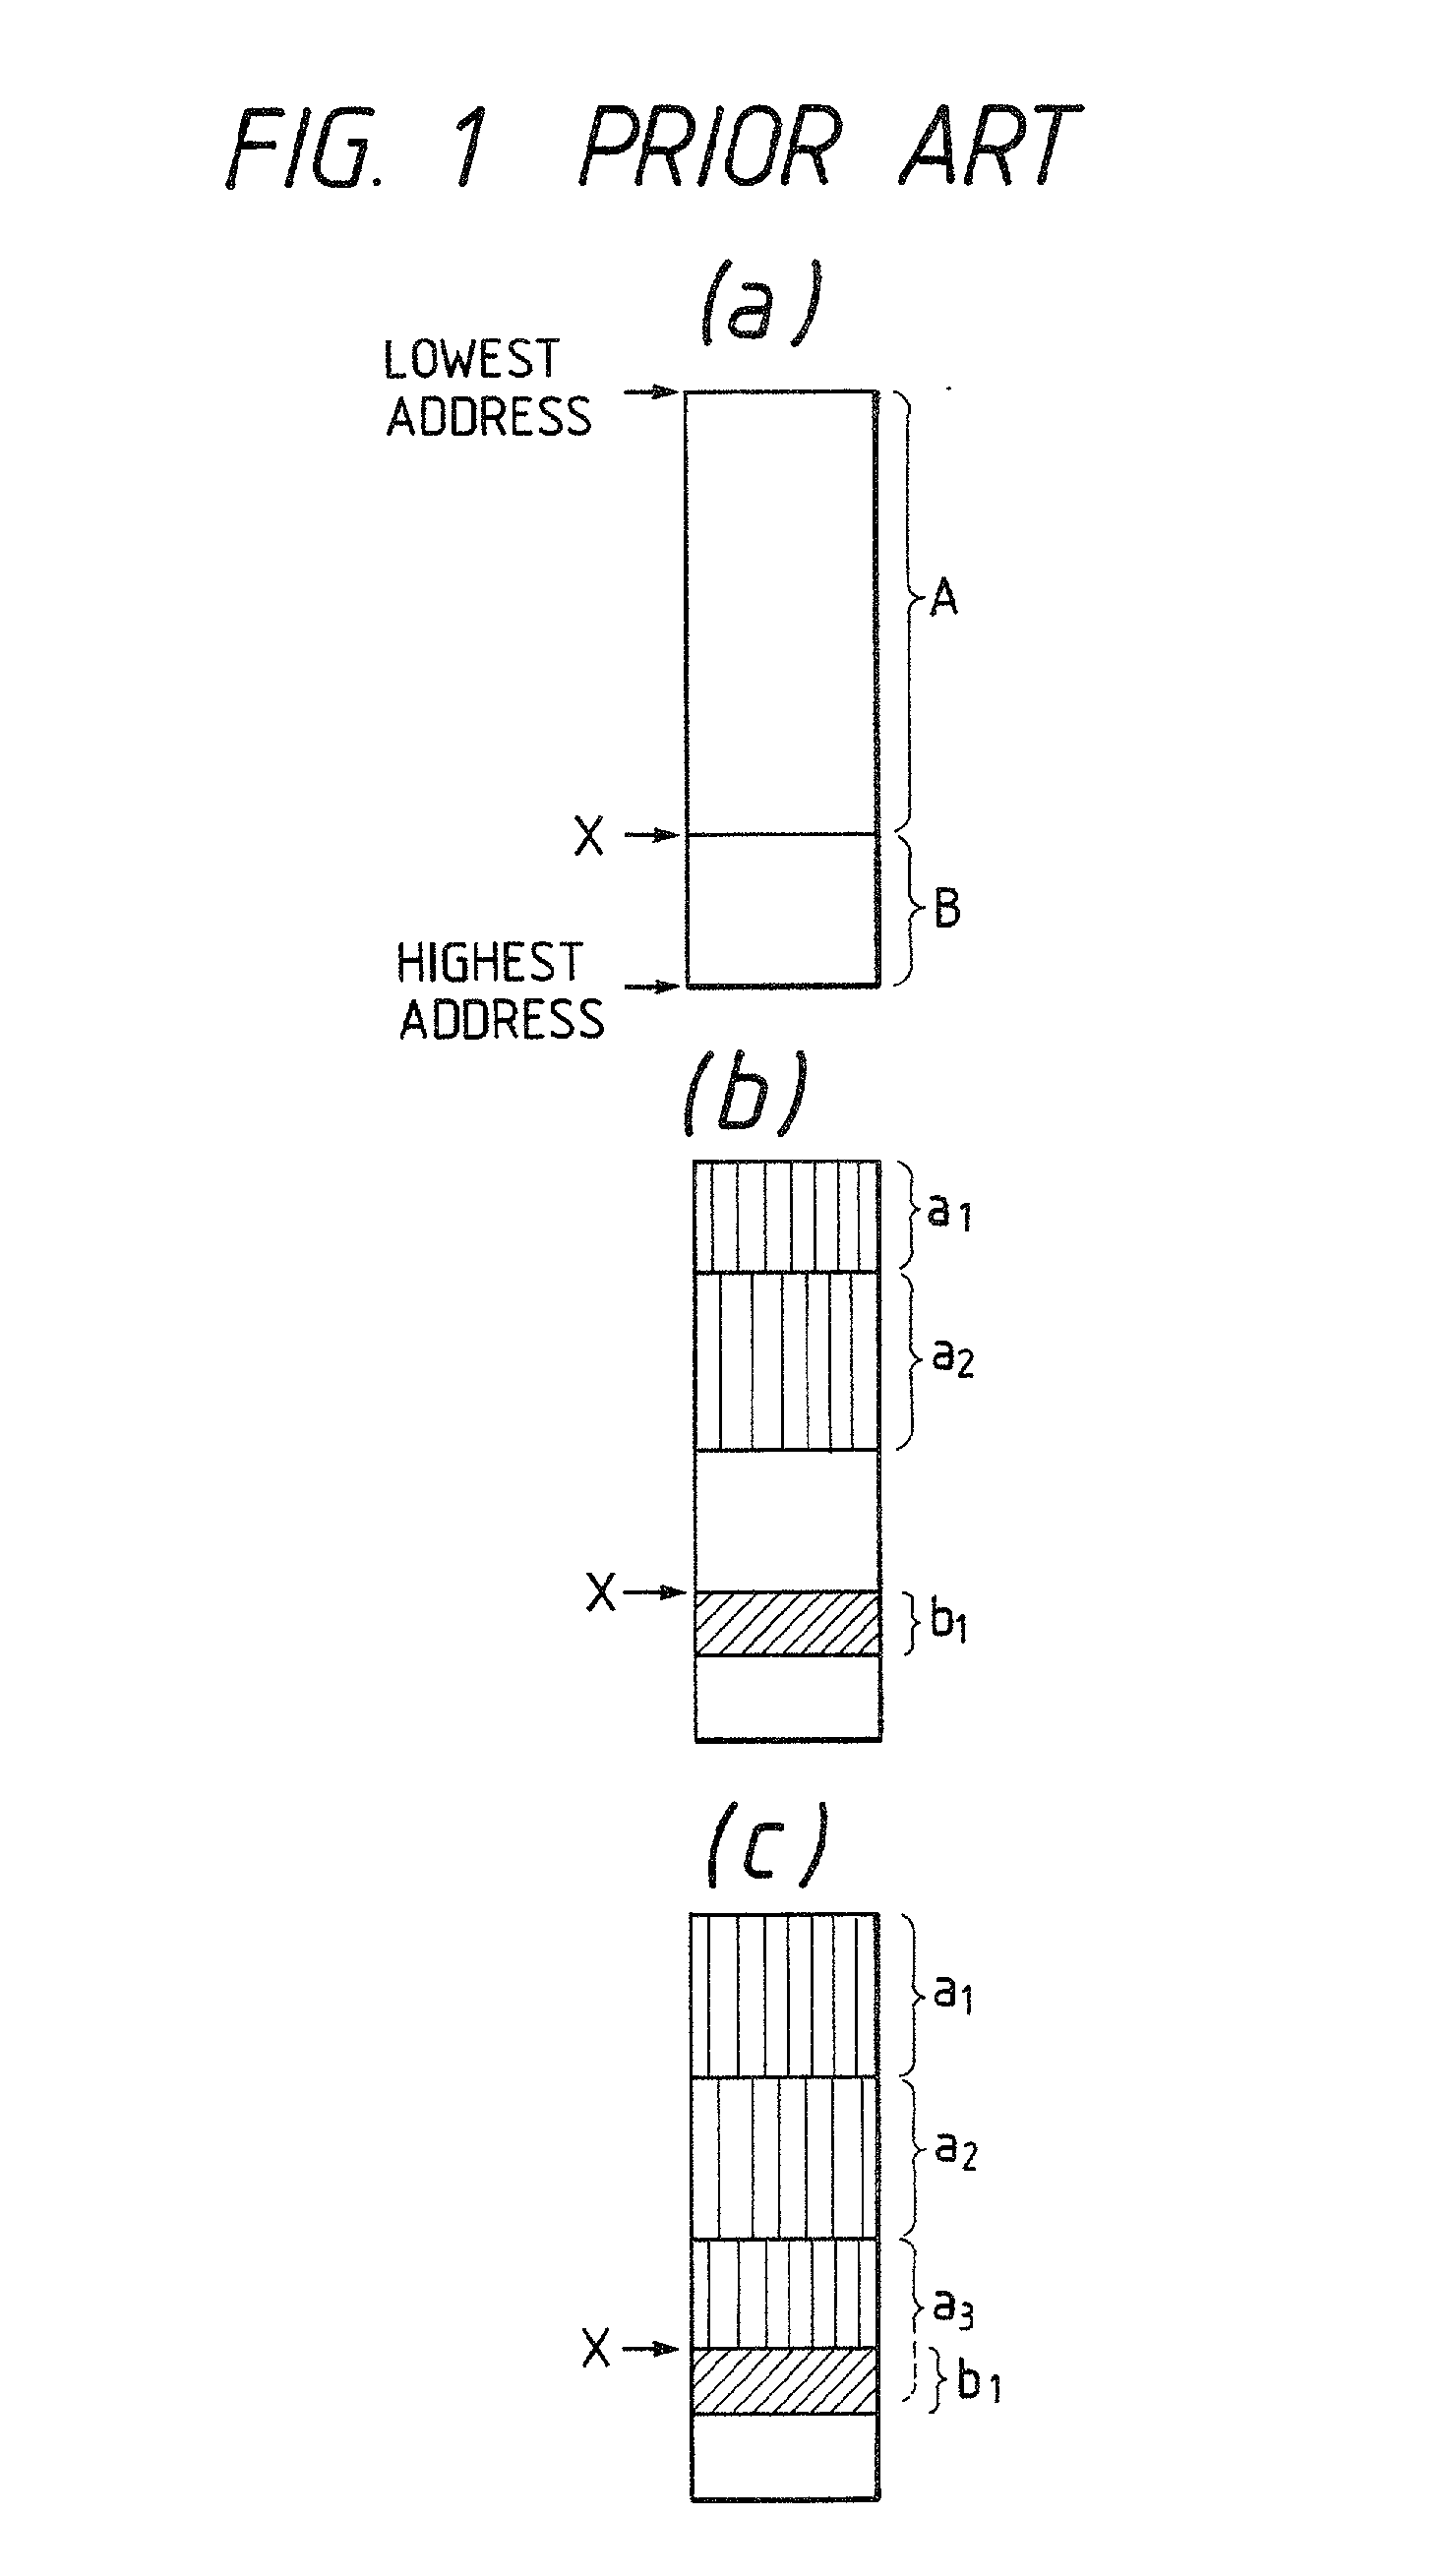 Data communication apparatus having common memory for storing video and audio data